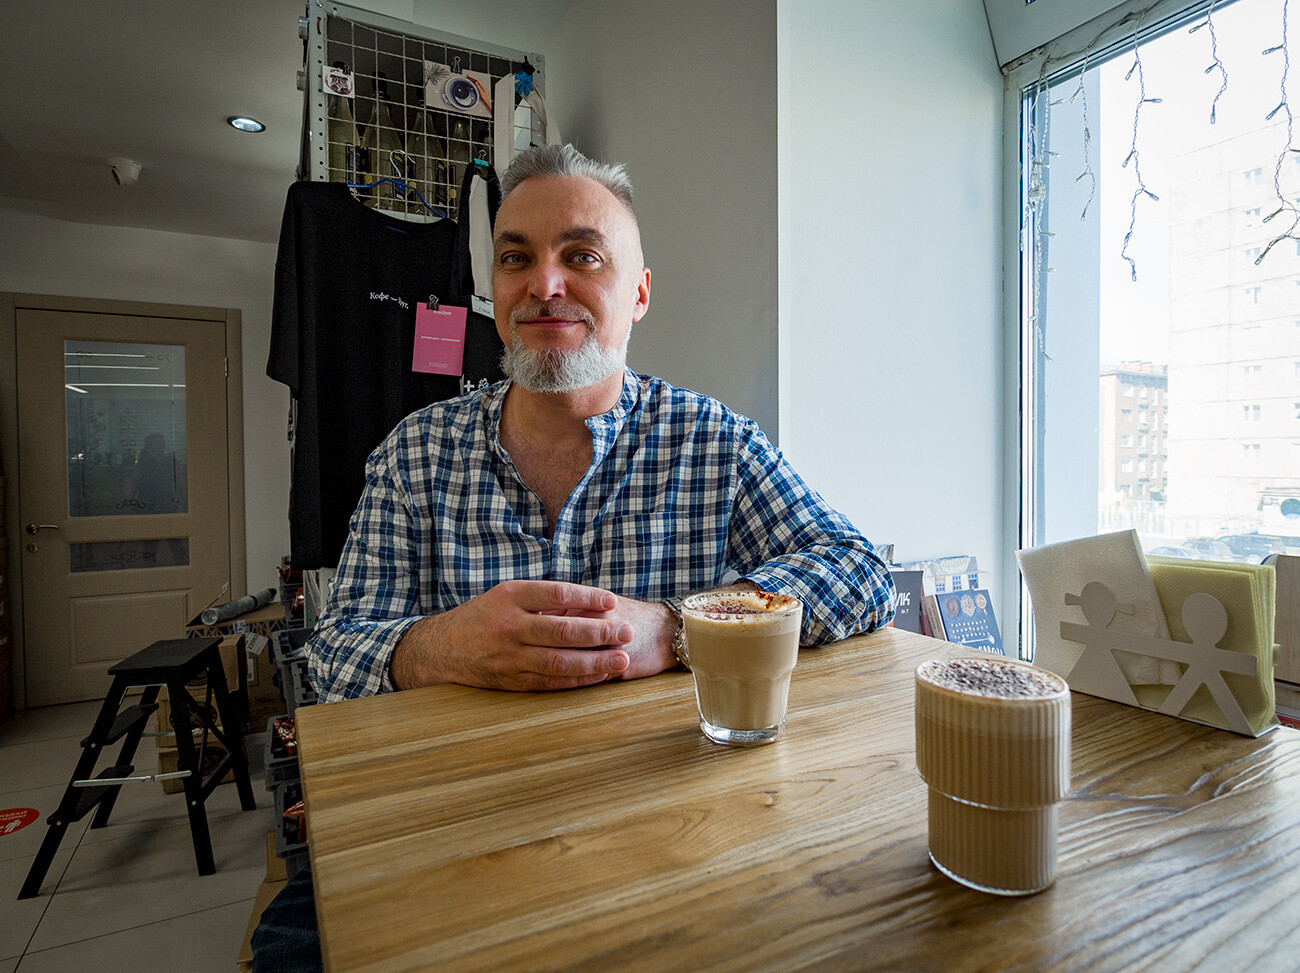 Sergei Serbin, founder of the Drug ('Friend') cafe. Chief expert of coffee in Norilsk.